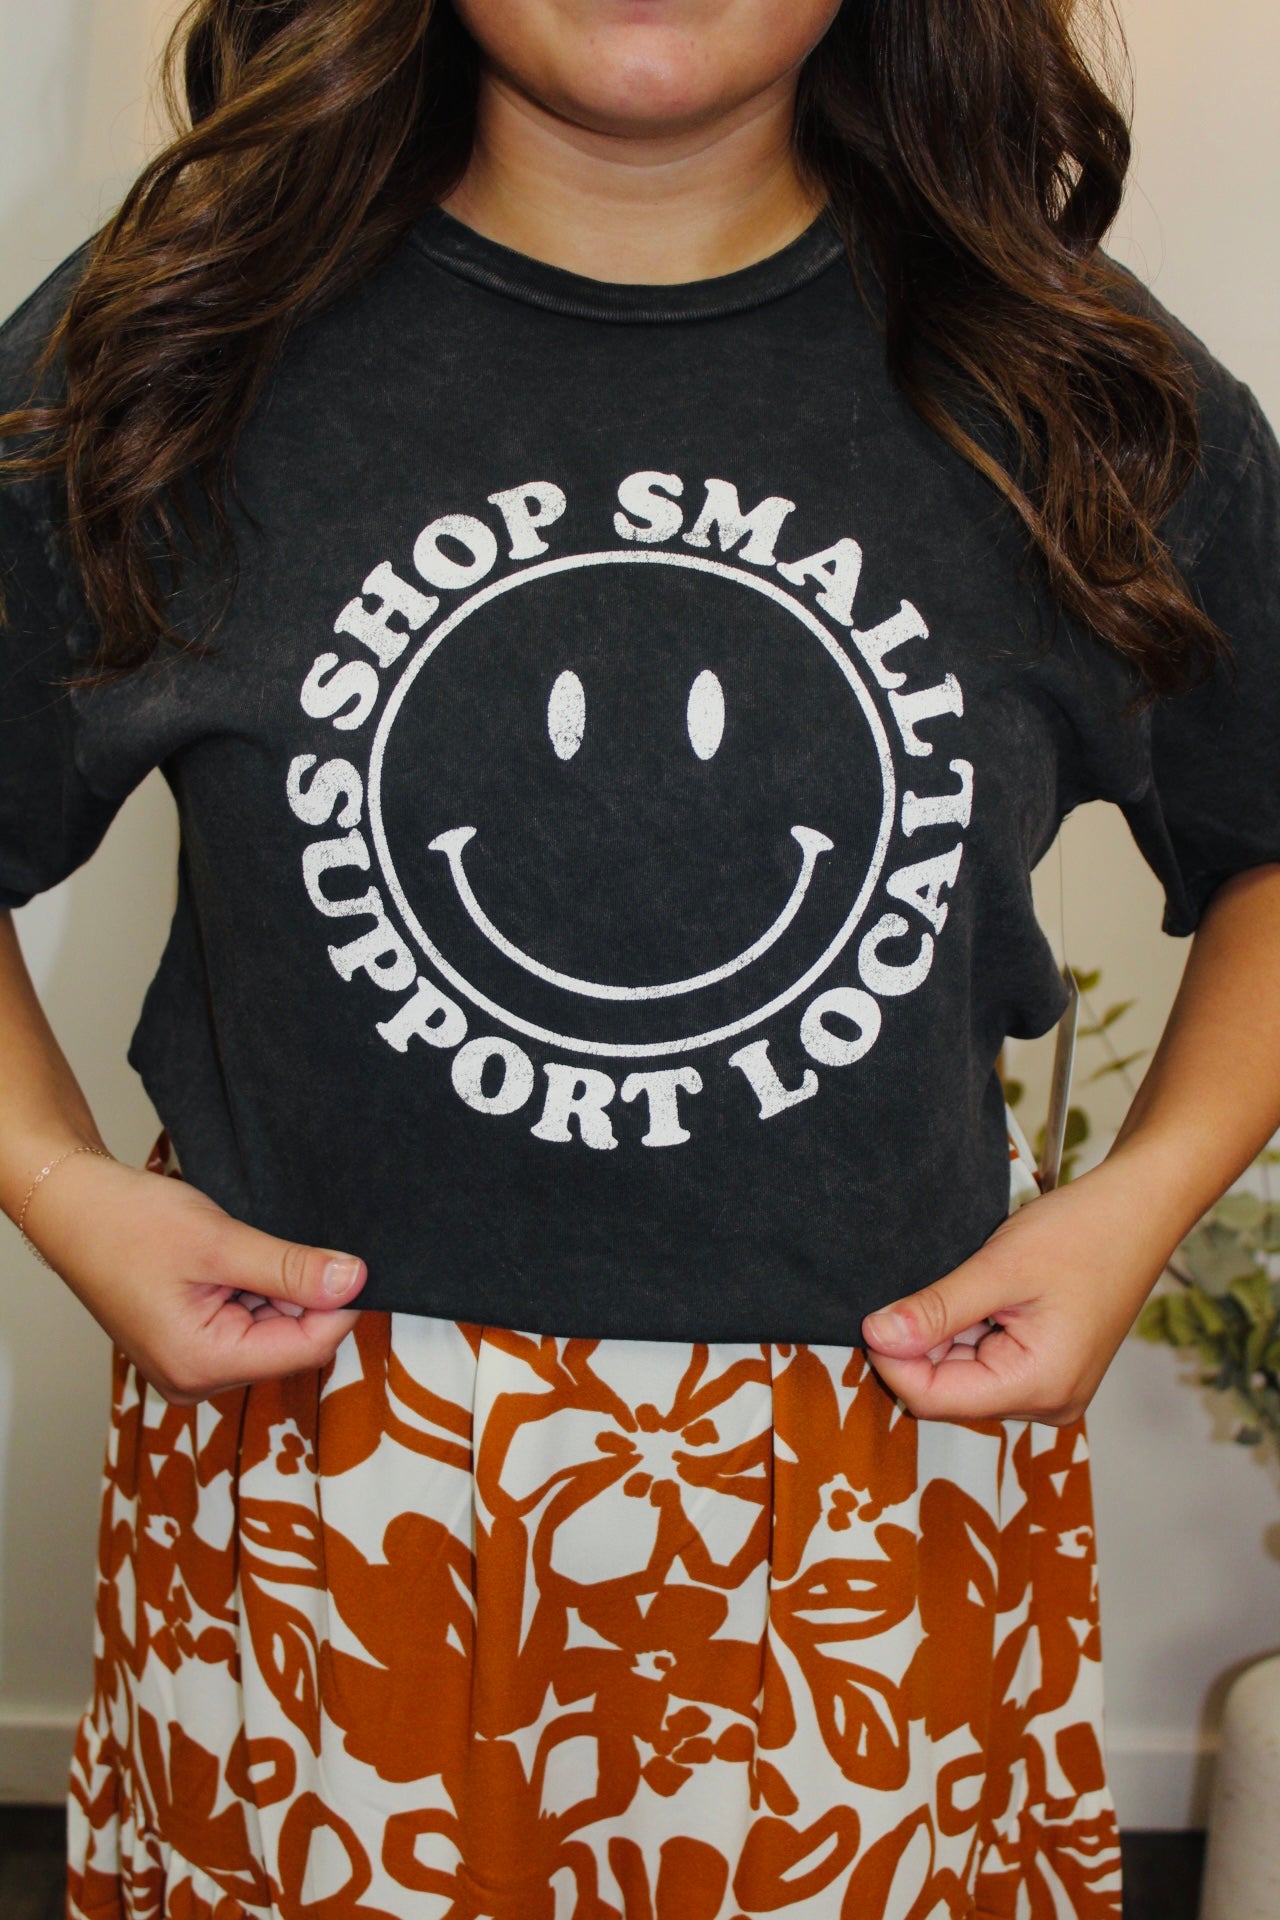 Shop Small, Support Local Graphic Tee